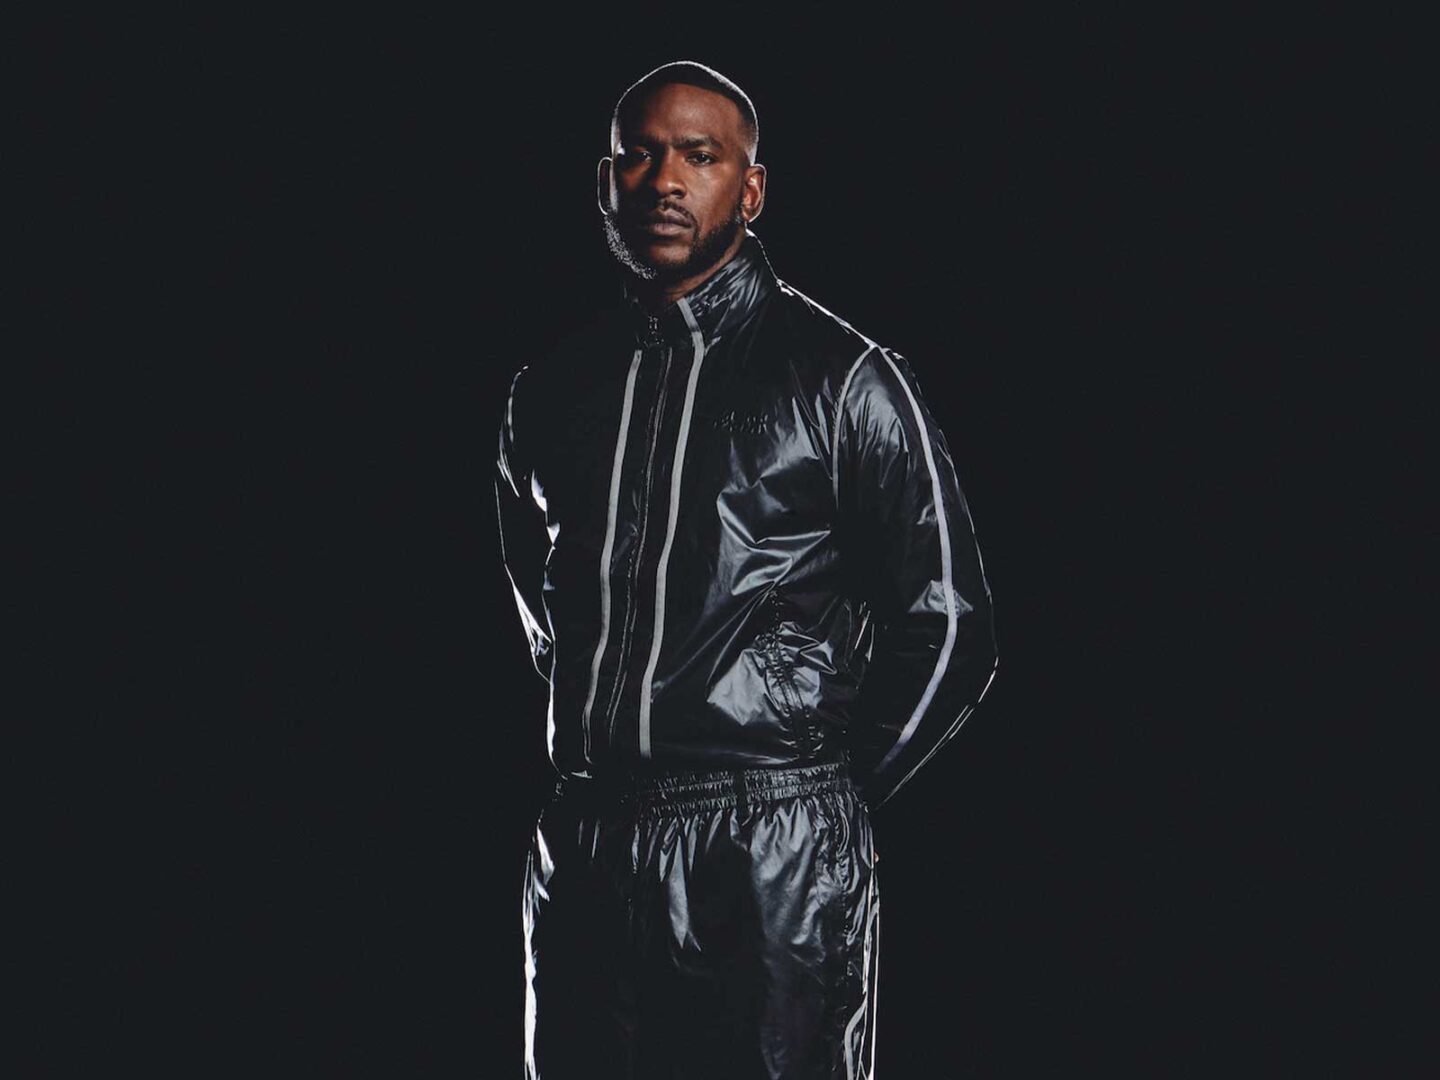 Skepta says Puma deal was much better than Nike deal